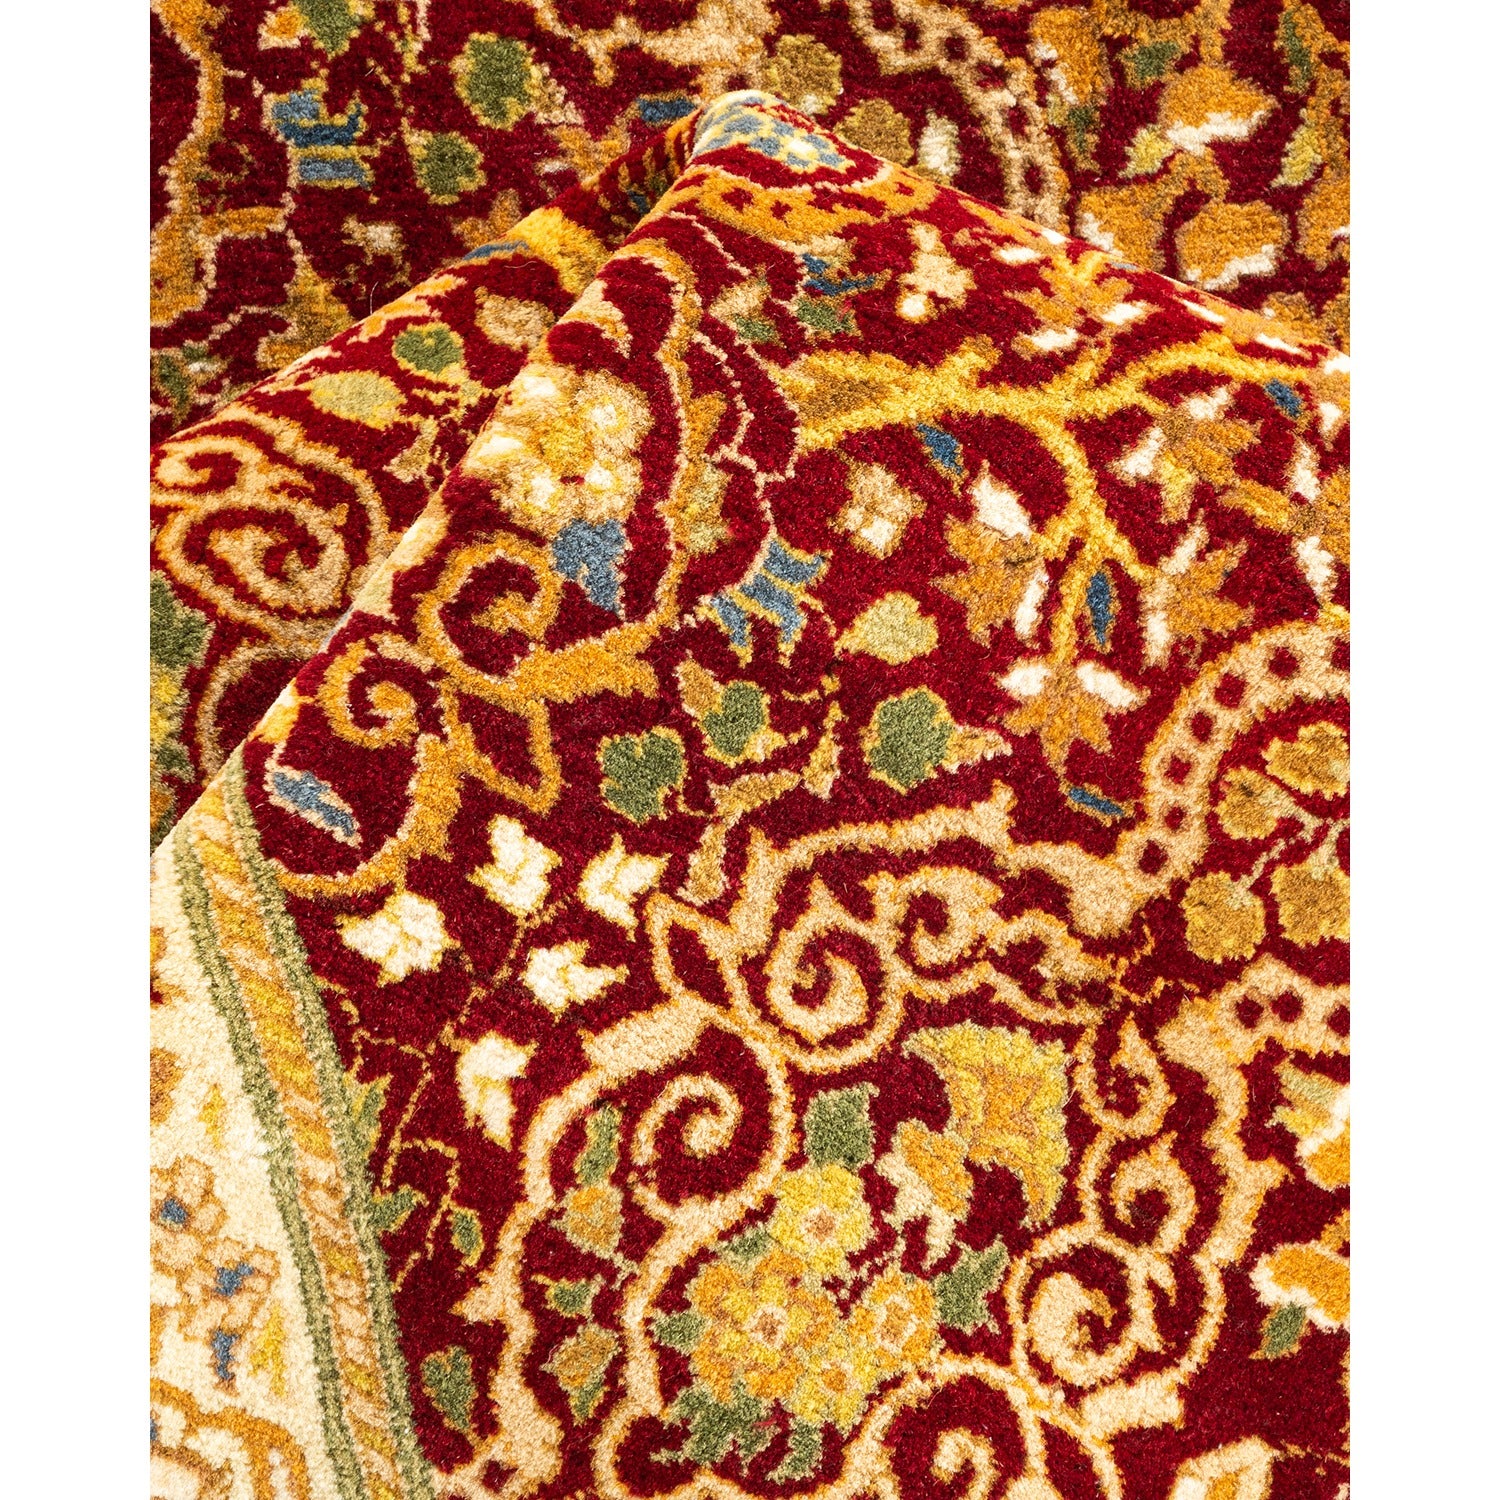 Close-up of a richly patterned, plush red carpet with intricate designs.